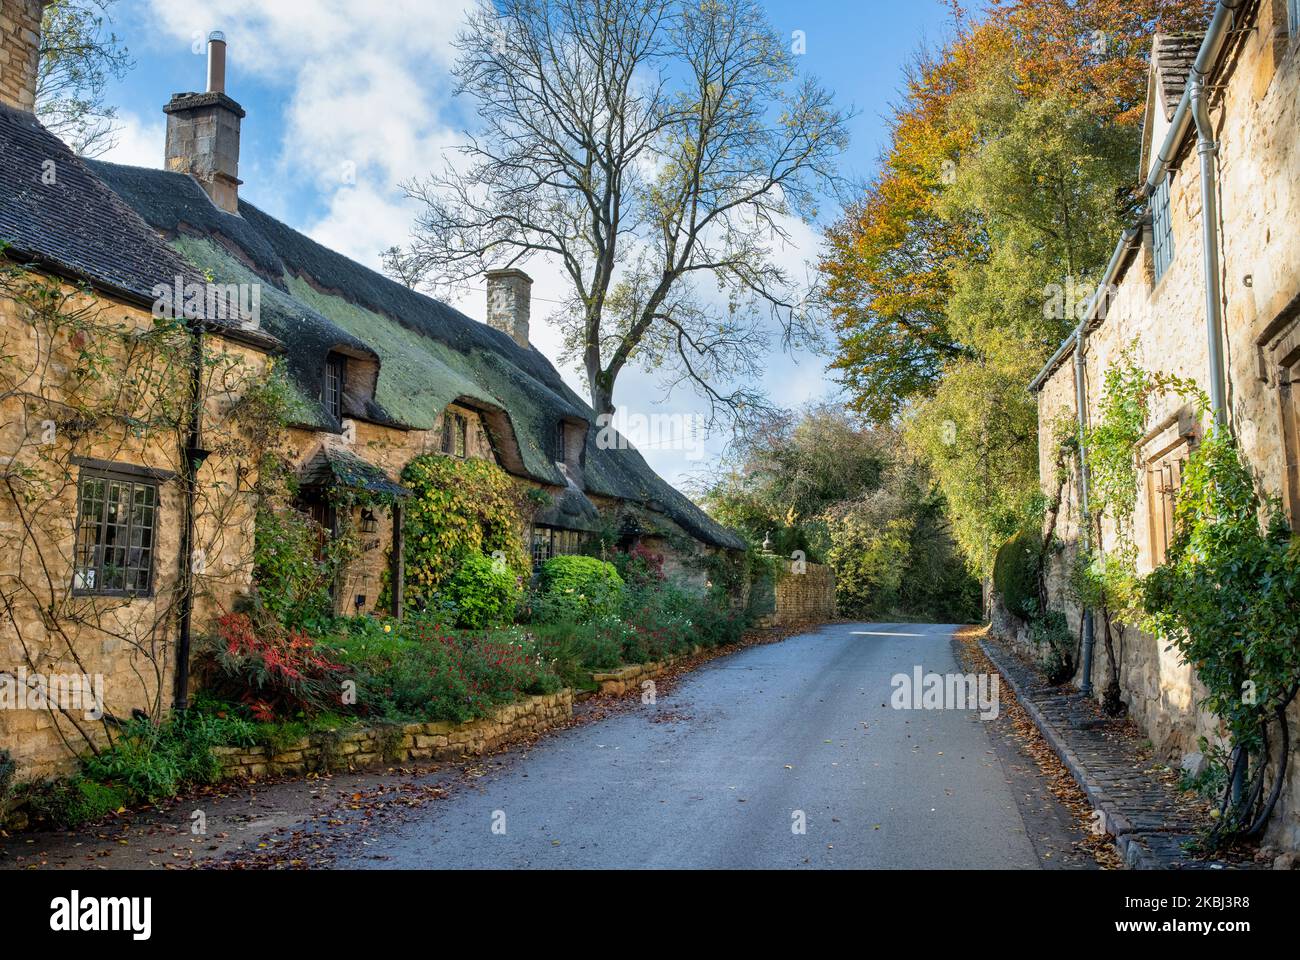 Thatched cotswold stone cottage in autumn. Broad Campden, Cotswolds, Gloucestershire, England Stock Photo